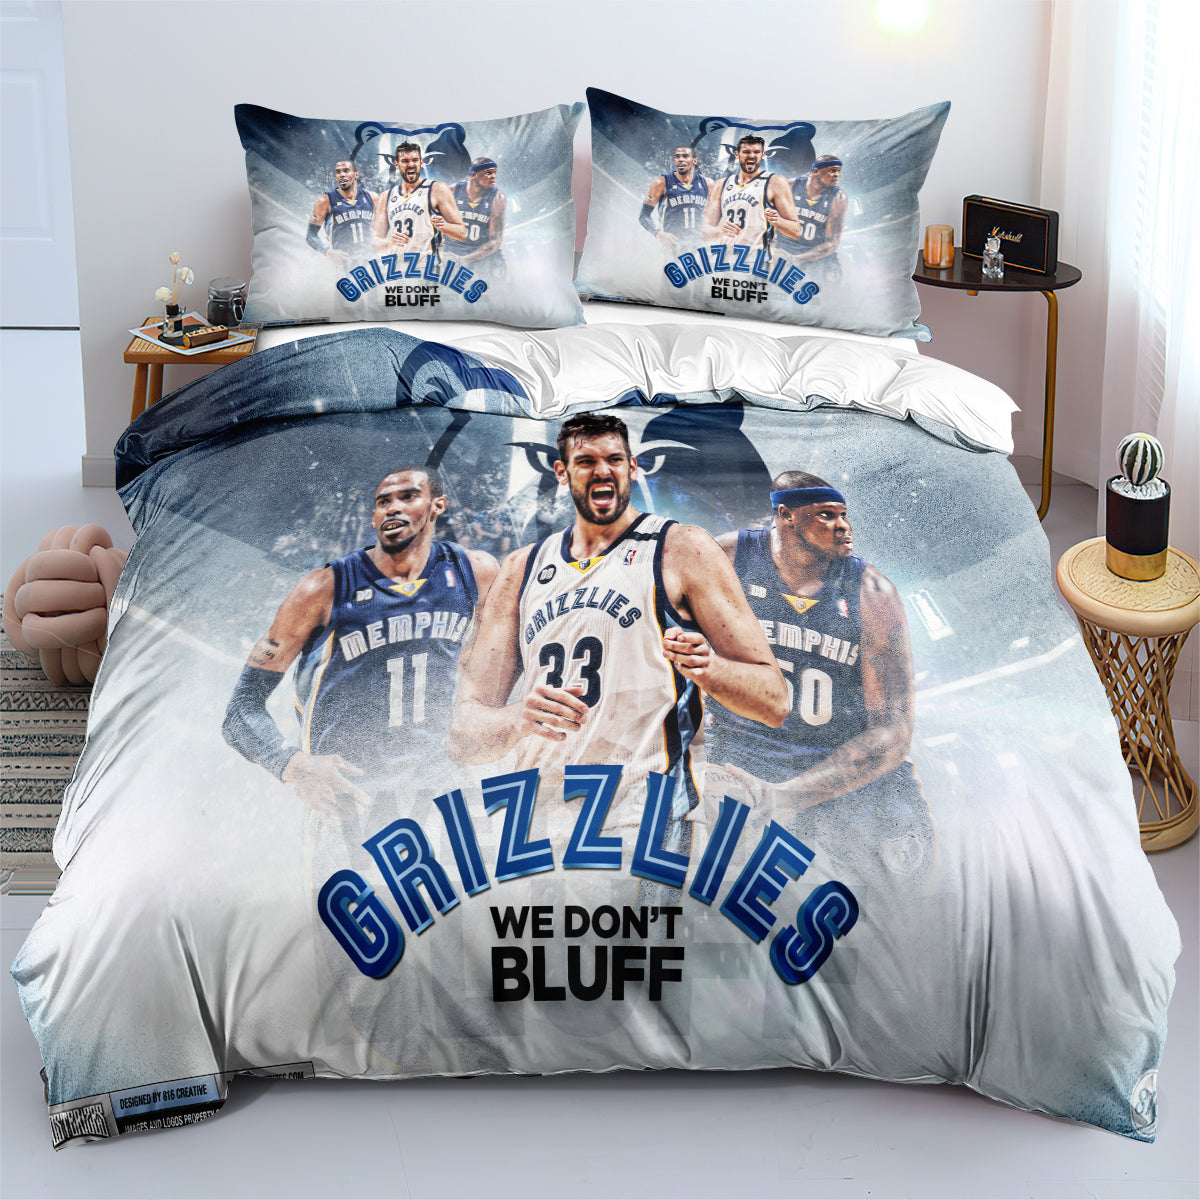 Memphis Basketball Grizzlies Bedding Set Quilt Cover Without Filler